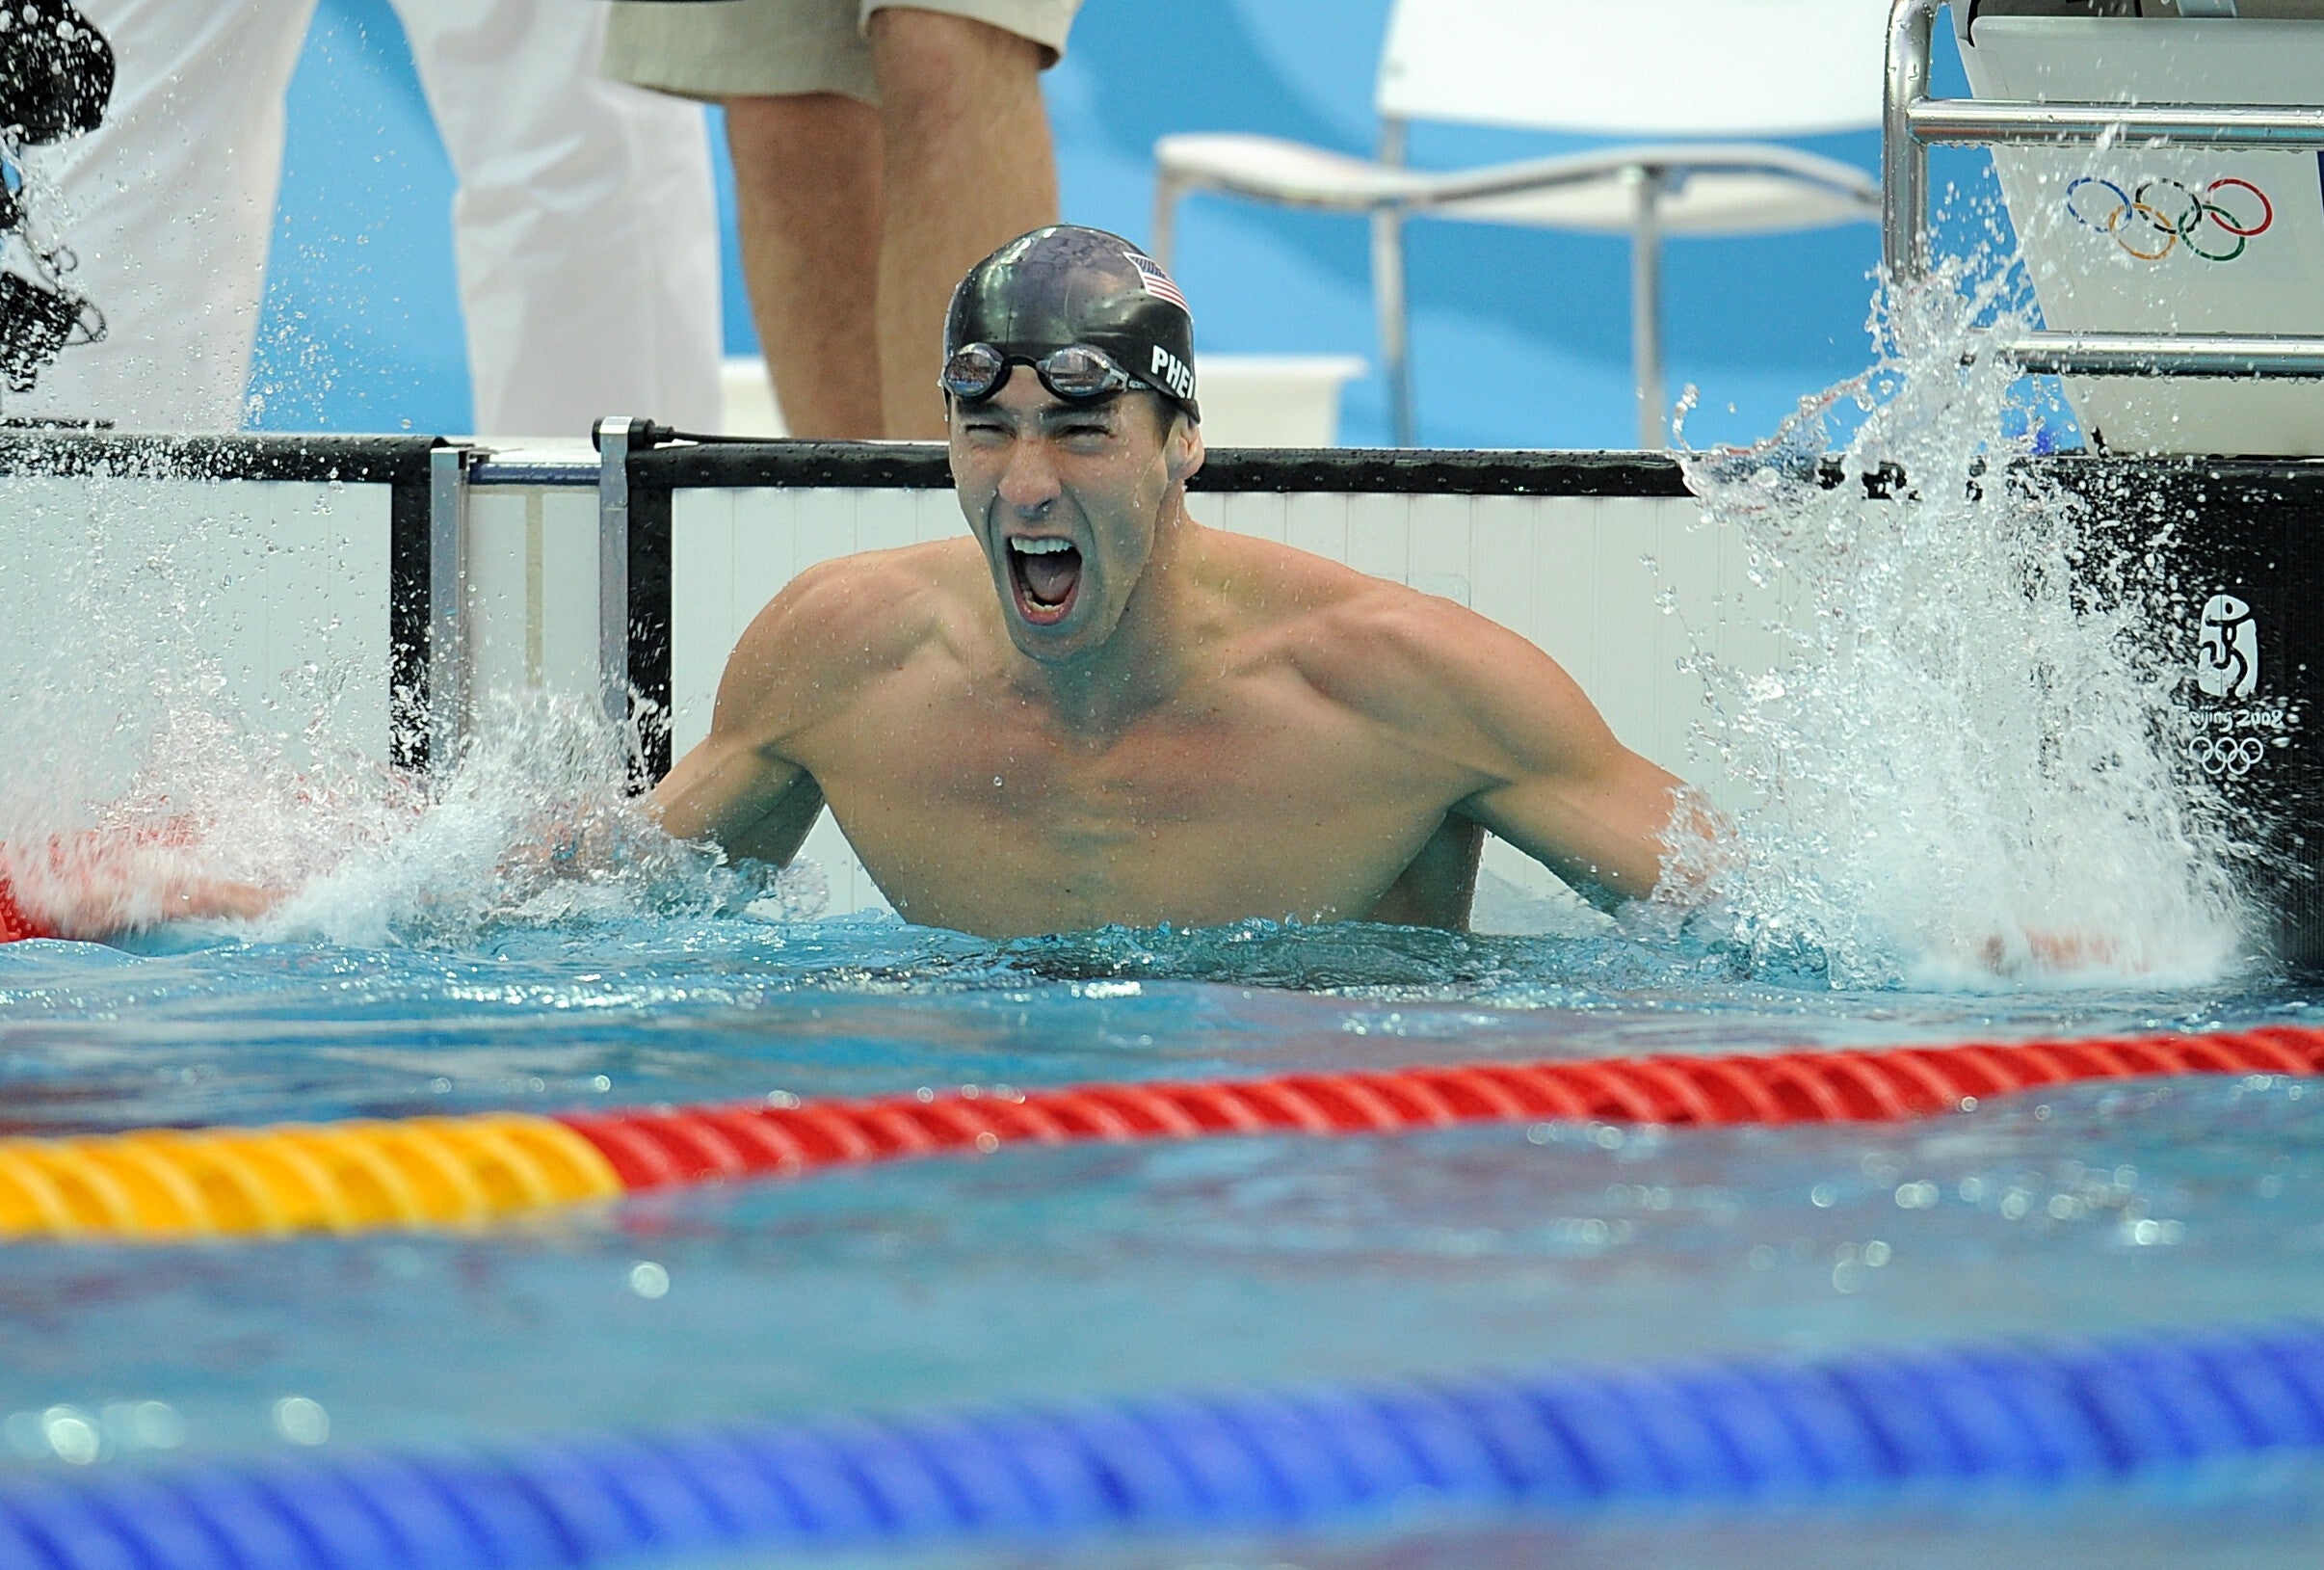 On this day in 2008 Michael Phelps breaks Mark Spitz’s Olympics record